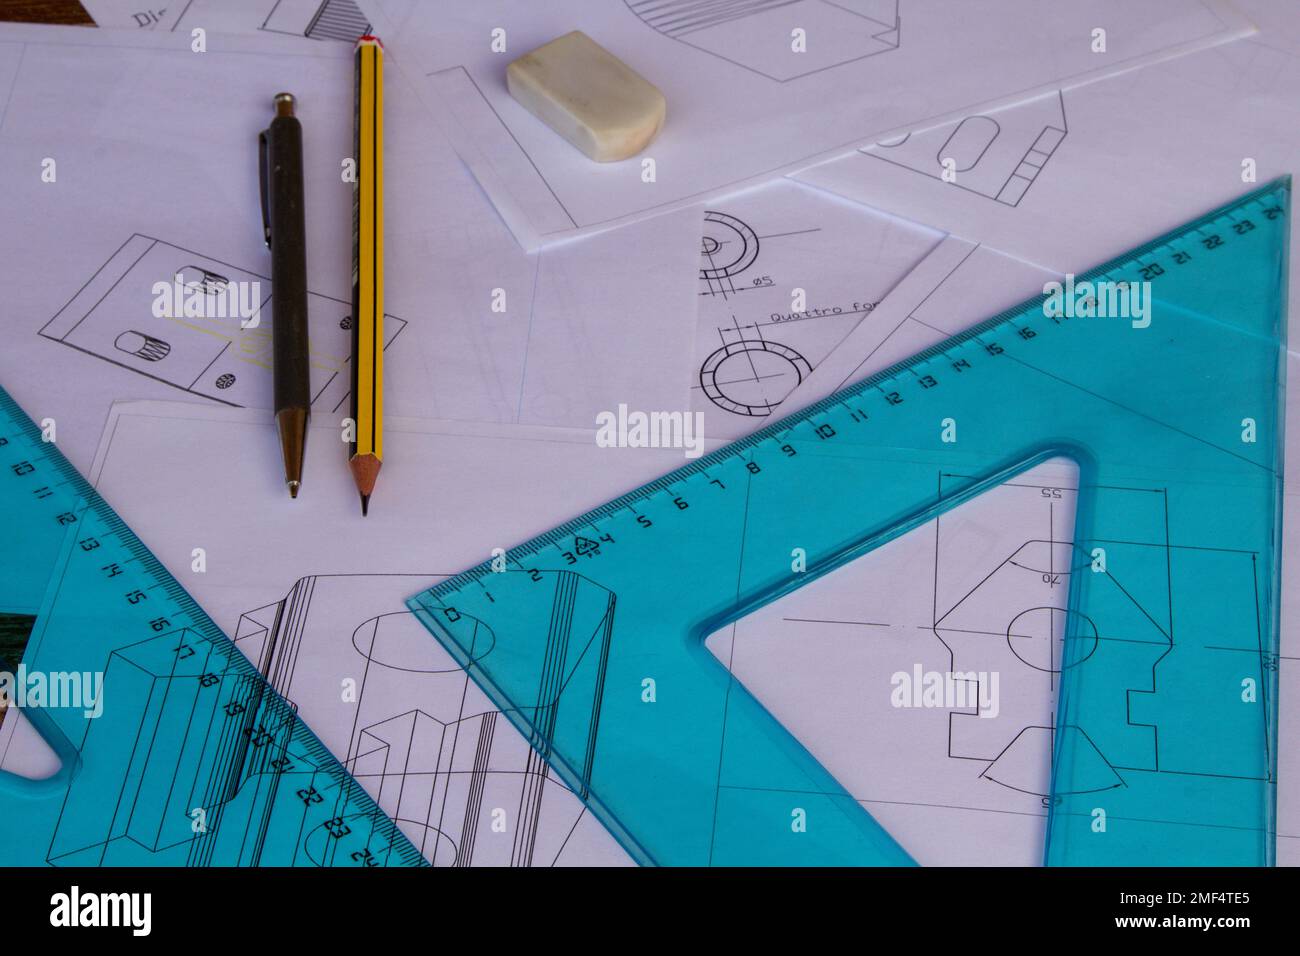 Image of an engineer's table with plans drawn with cad with ruler, set squares and drawing pencils in the background. Stock Photo